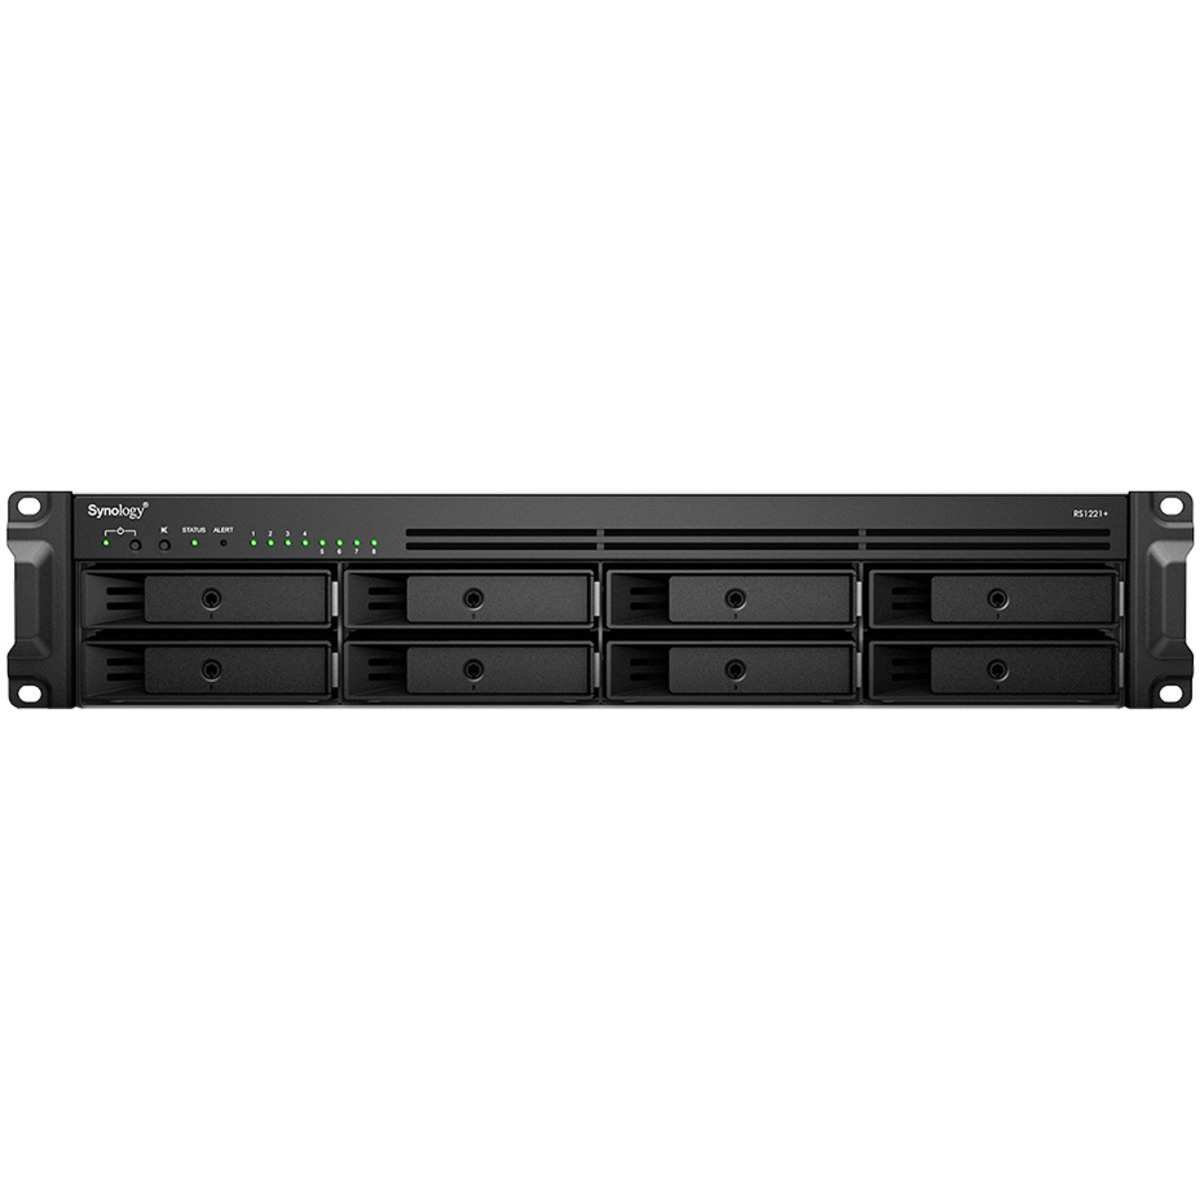 Synology RackStation RS1221RP+ 32tb 8-Bay RackMount Multimedia / Power User / Business NAS - Network Attached Storage Device 8x4tb Seagate IronWolf Pro ST4000NE001 3.5 7200rpm SATA 6Gb/s HDD NAS Class Drives Installed - Burn-In Tested - FREE RAM UPGRADE RackStation RS1221RP+